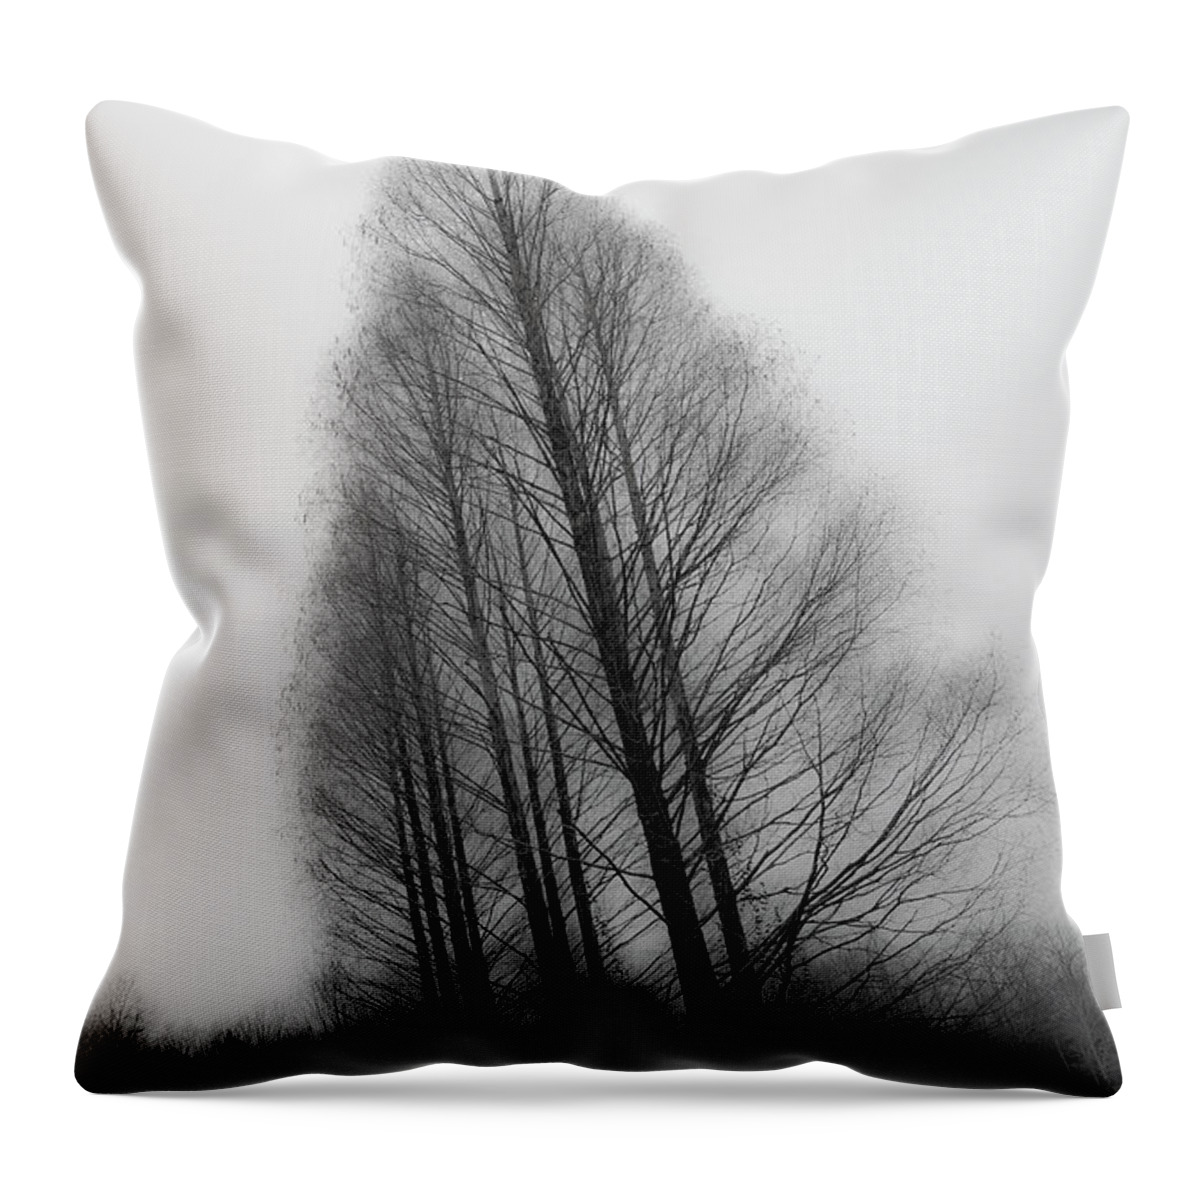 Tranquility Throw Pillow featuring the photograph Trees In Winter Without Leaves by Marie Hickman